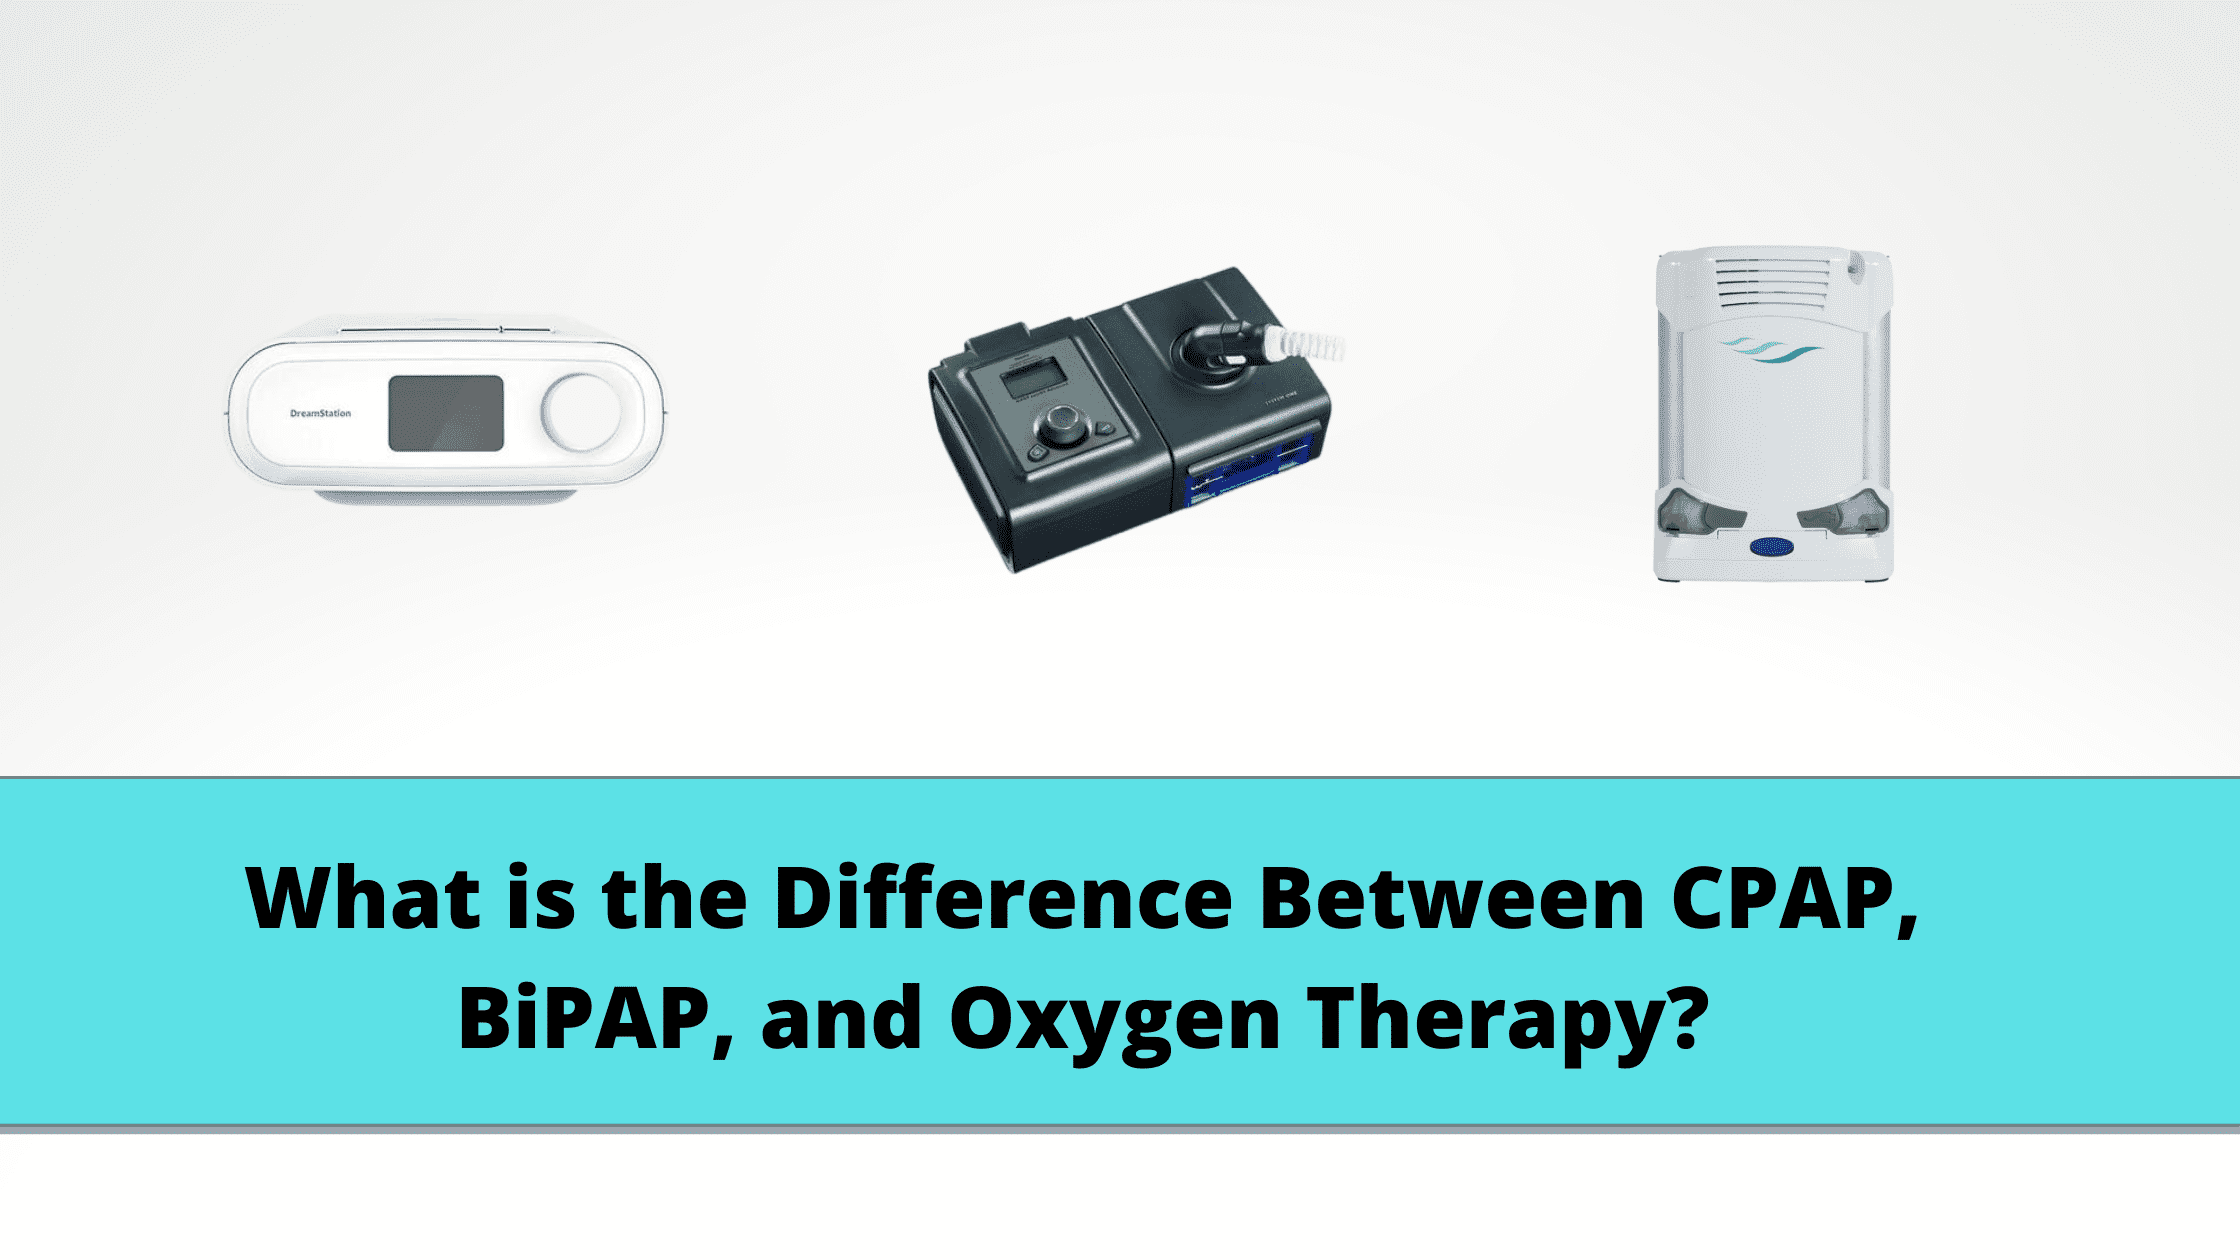 What is the Difference Between CPAP, BiPAP, and Oxygen Therapy?